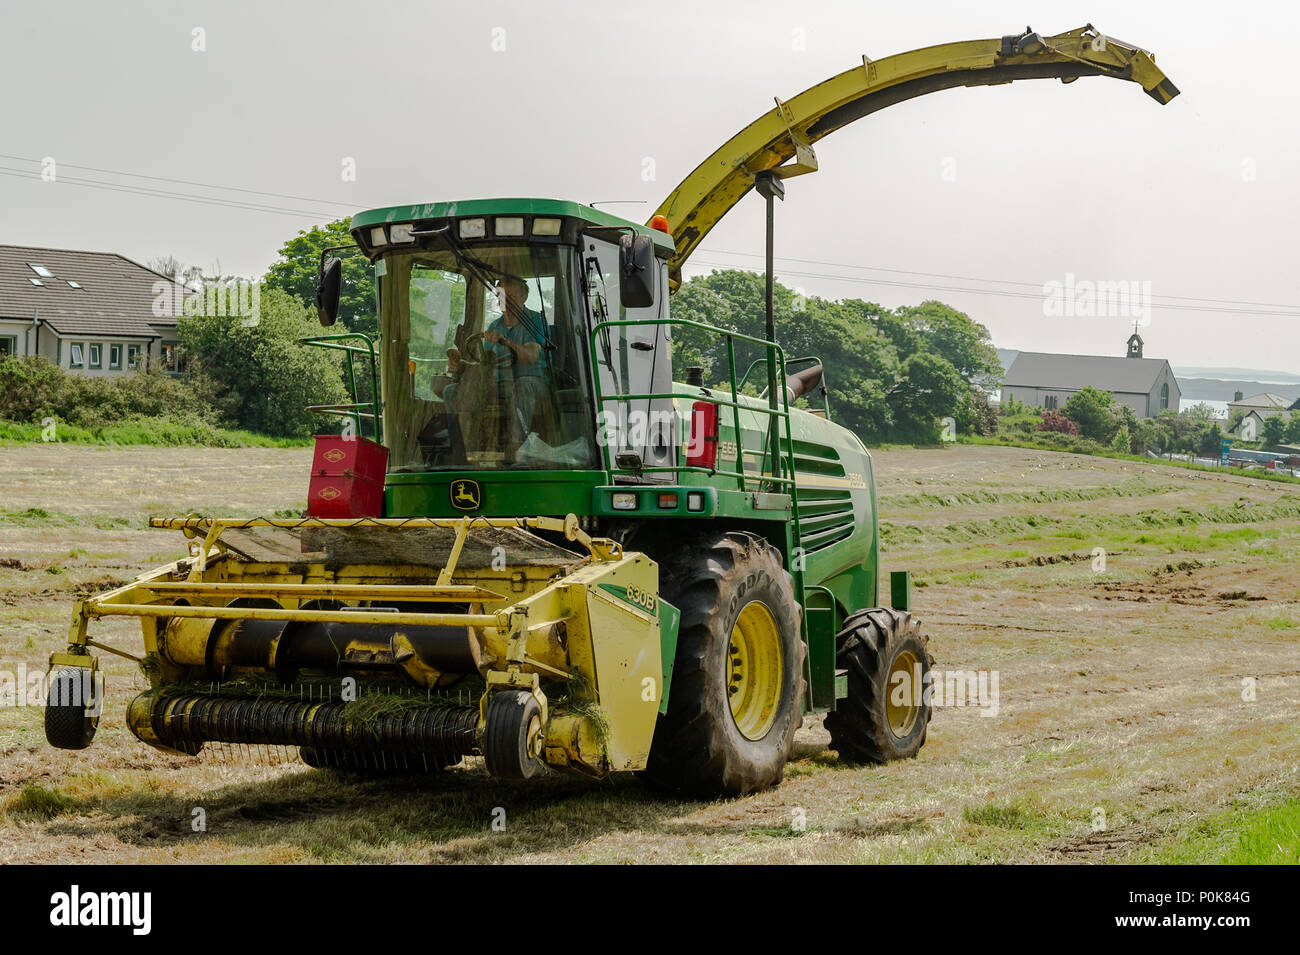 John Deere 7500 Combine Harvester at work collecting cut grass for silage on a farm in Schull, County Cork, Ireland. Stock Photo